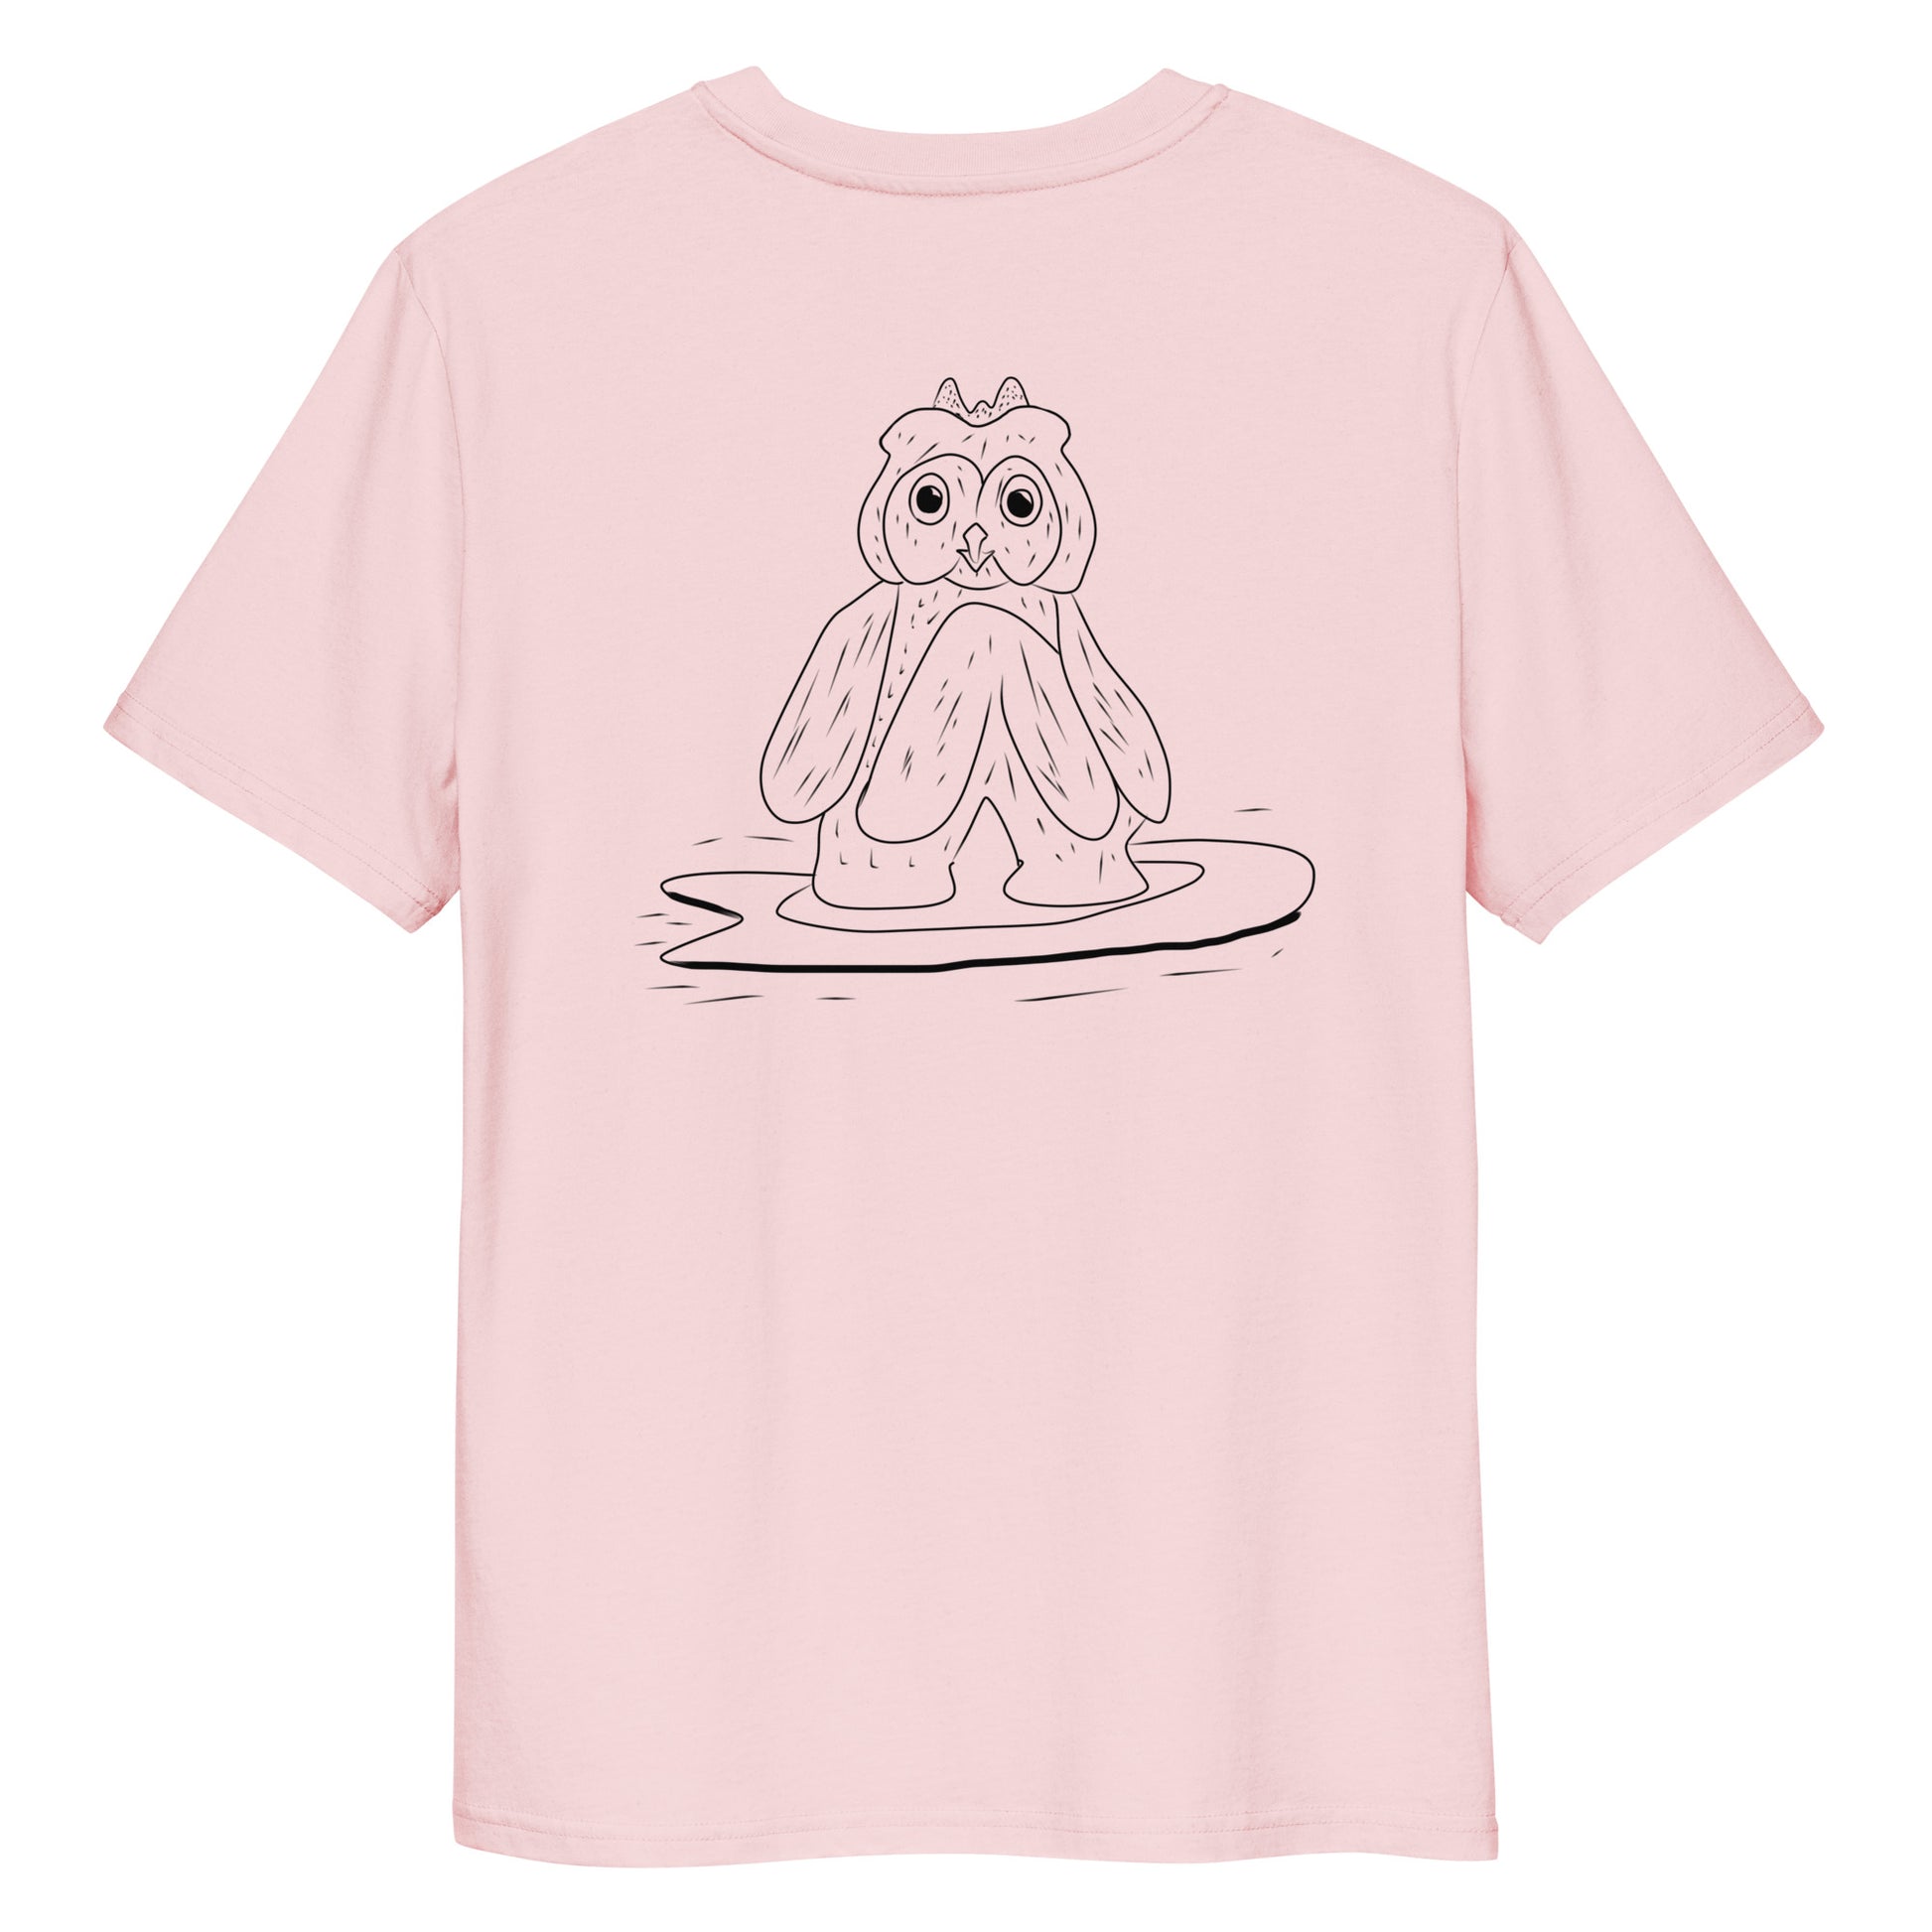 Surfing Owl | 100% Organic Cotton T Shirt in pink back